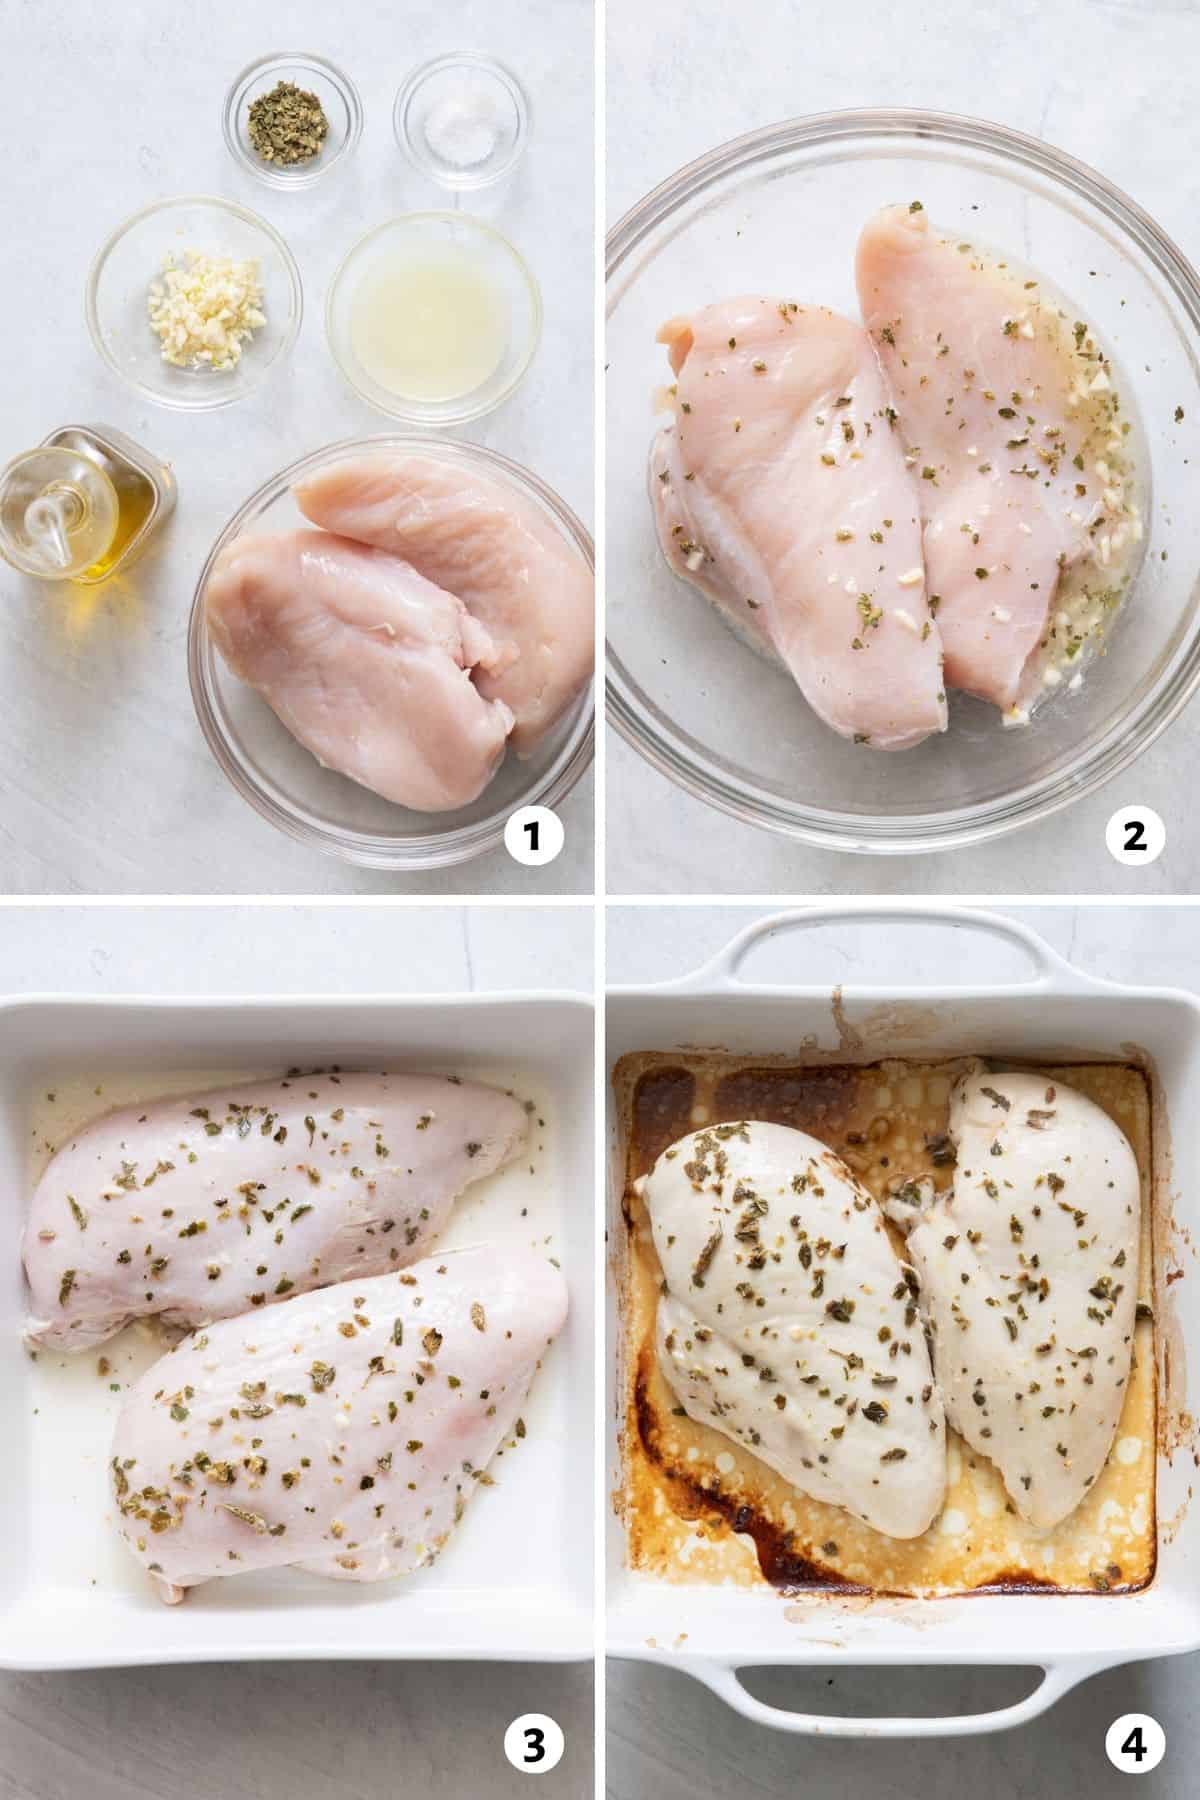 4 image collage showing ingredients for marinade, chicken breasts in bowl covering marinade, and then chicken breast in square baking dish before and after cooked.